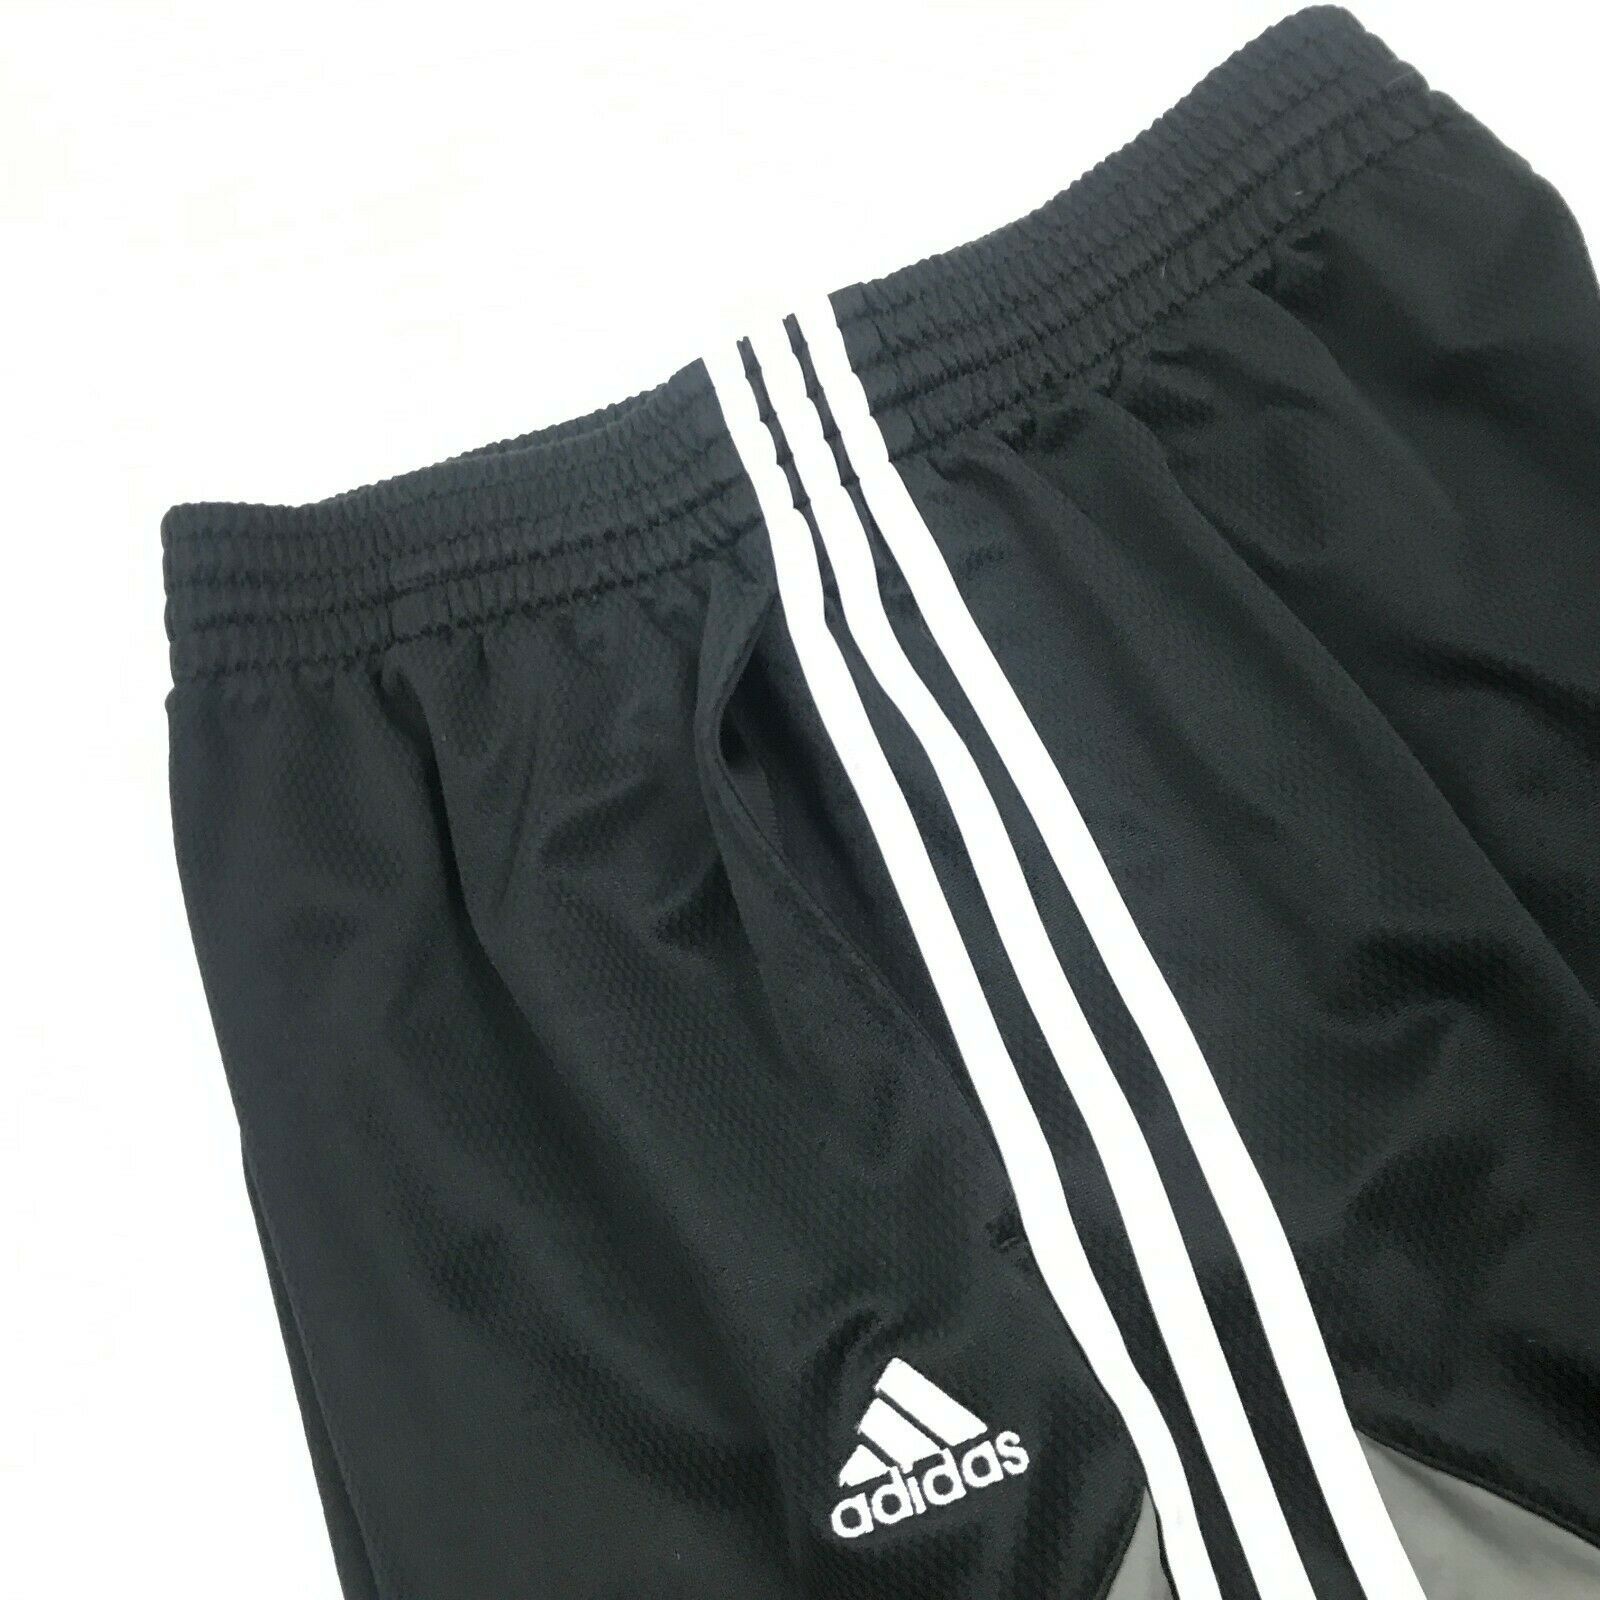 Adidas Mens Gym Shorts Size S Small Black Workout Bottoms Athletic ...